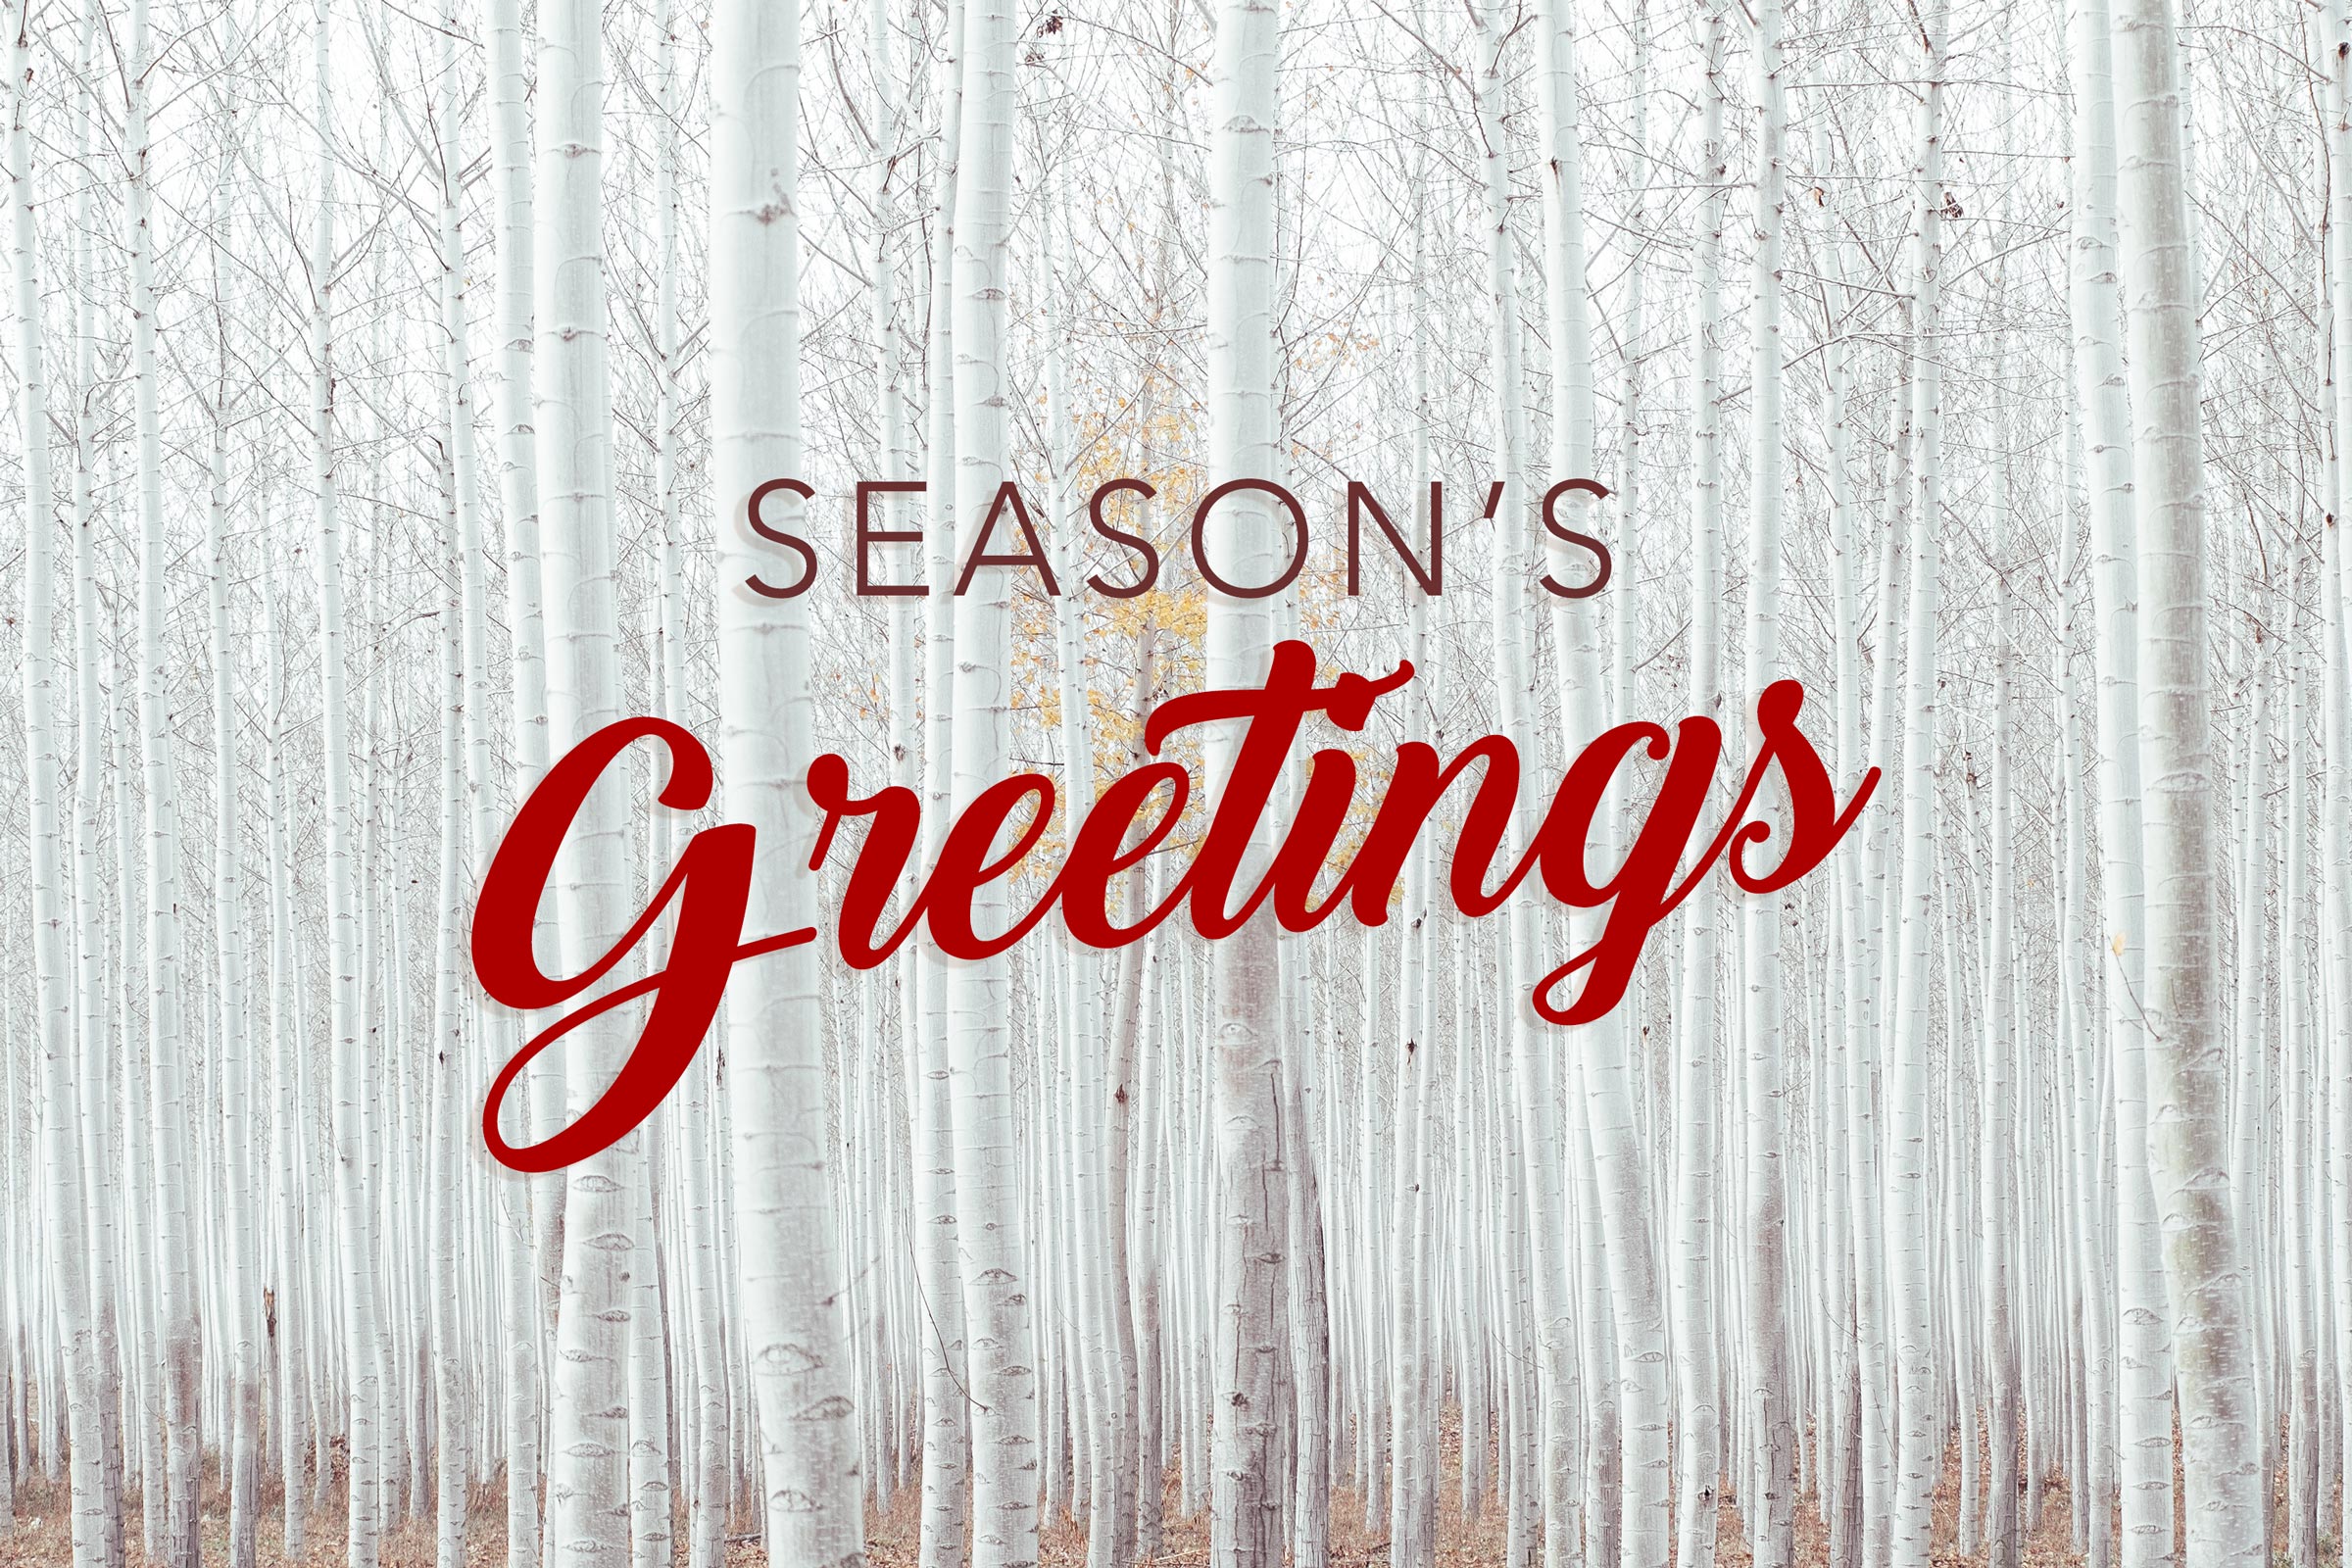  download 15 Seasons Greetings Cards Stock Images HD 2400x1600